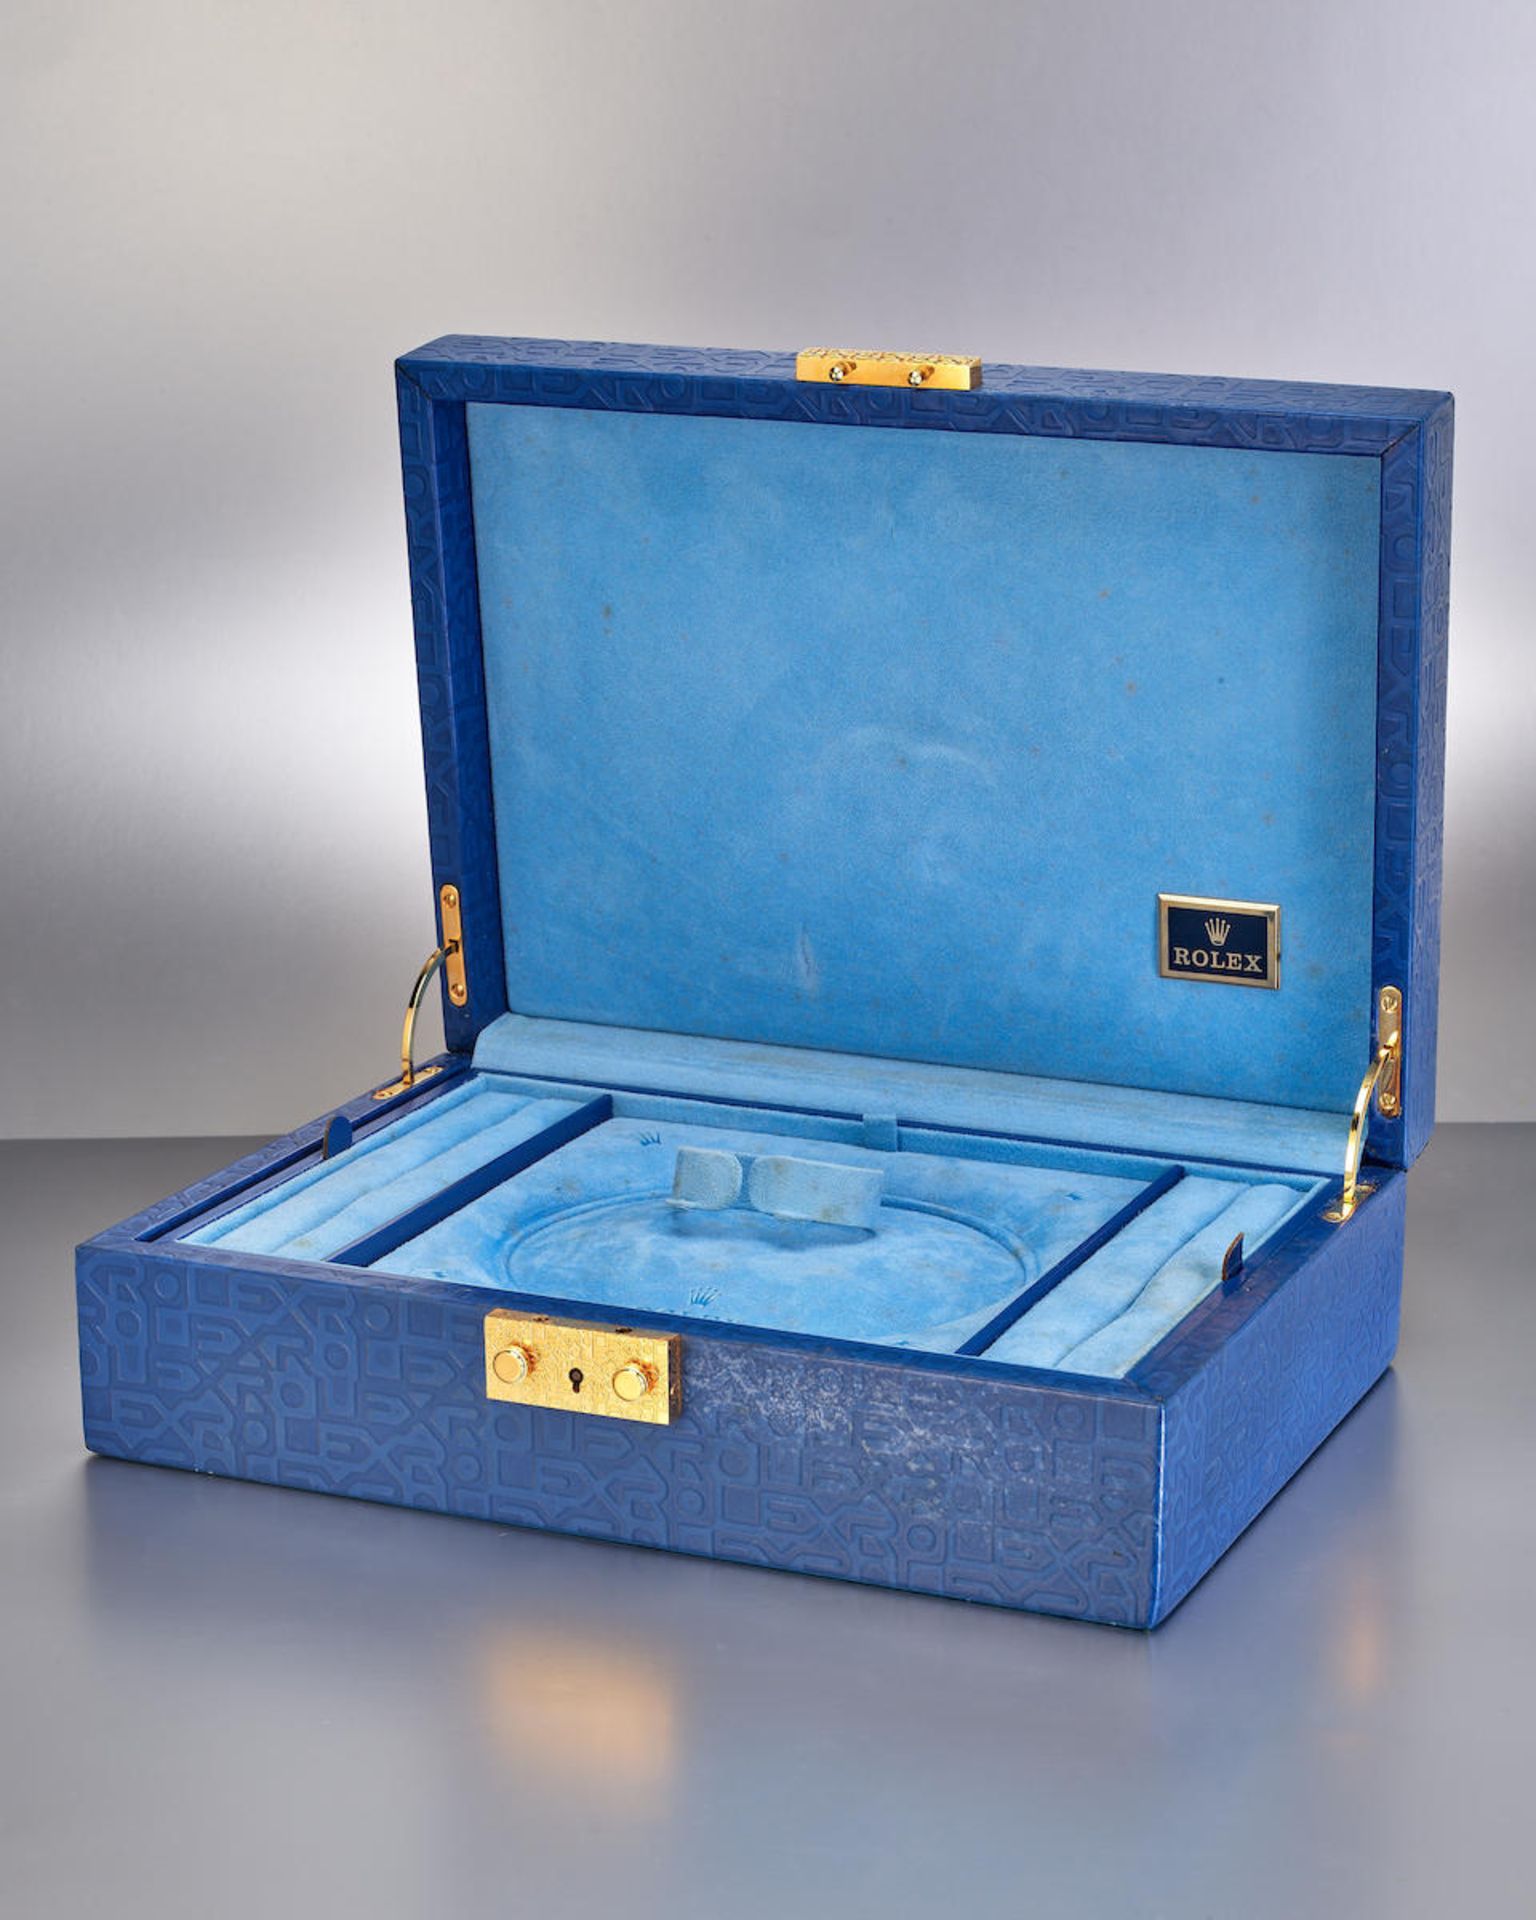 [NO RESERVE] ROLEX | A GROUP OF TWO: A LARGE BLUE LEATHERETTE WATCH AND JEWELRY BOX WITH JUBILEE... - Bild 5 aus 5